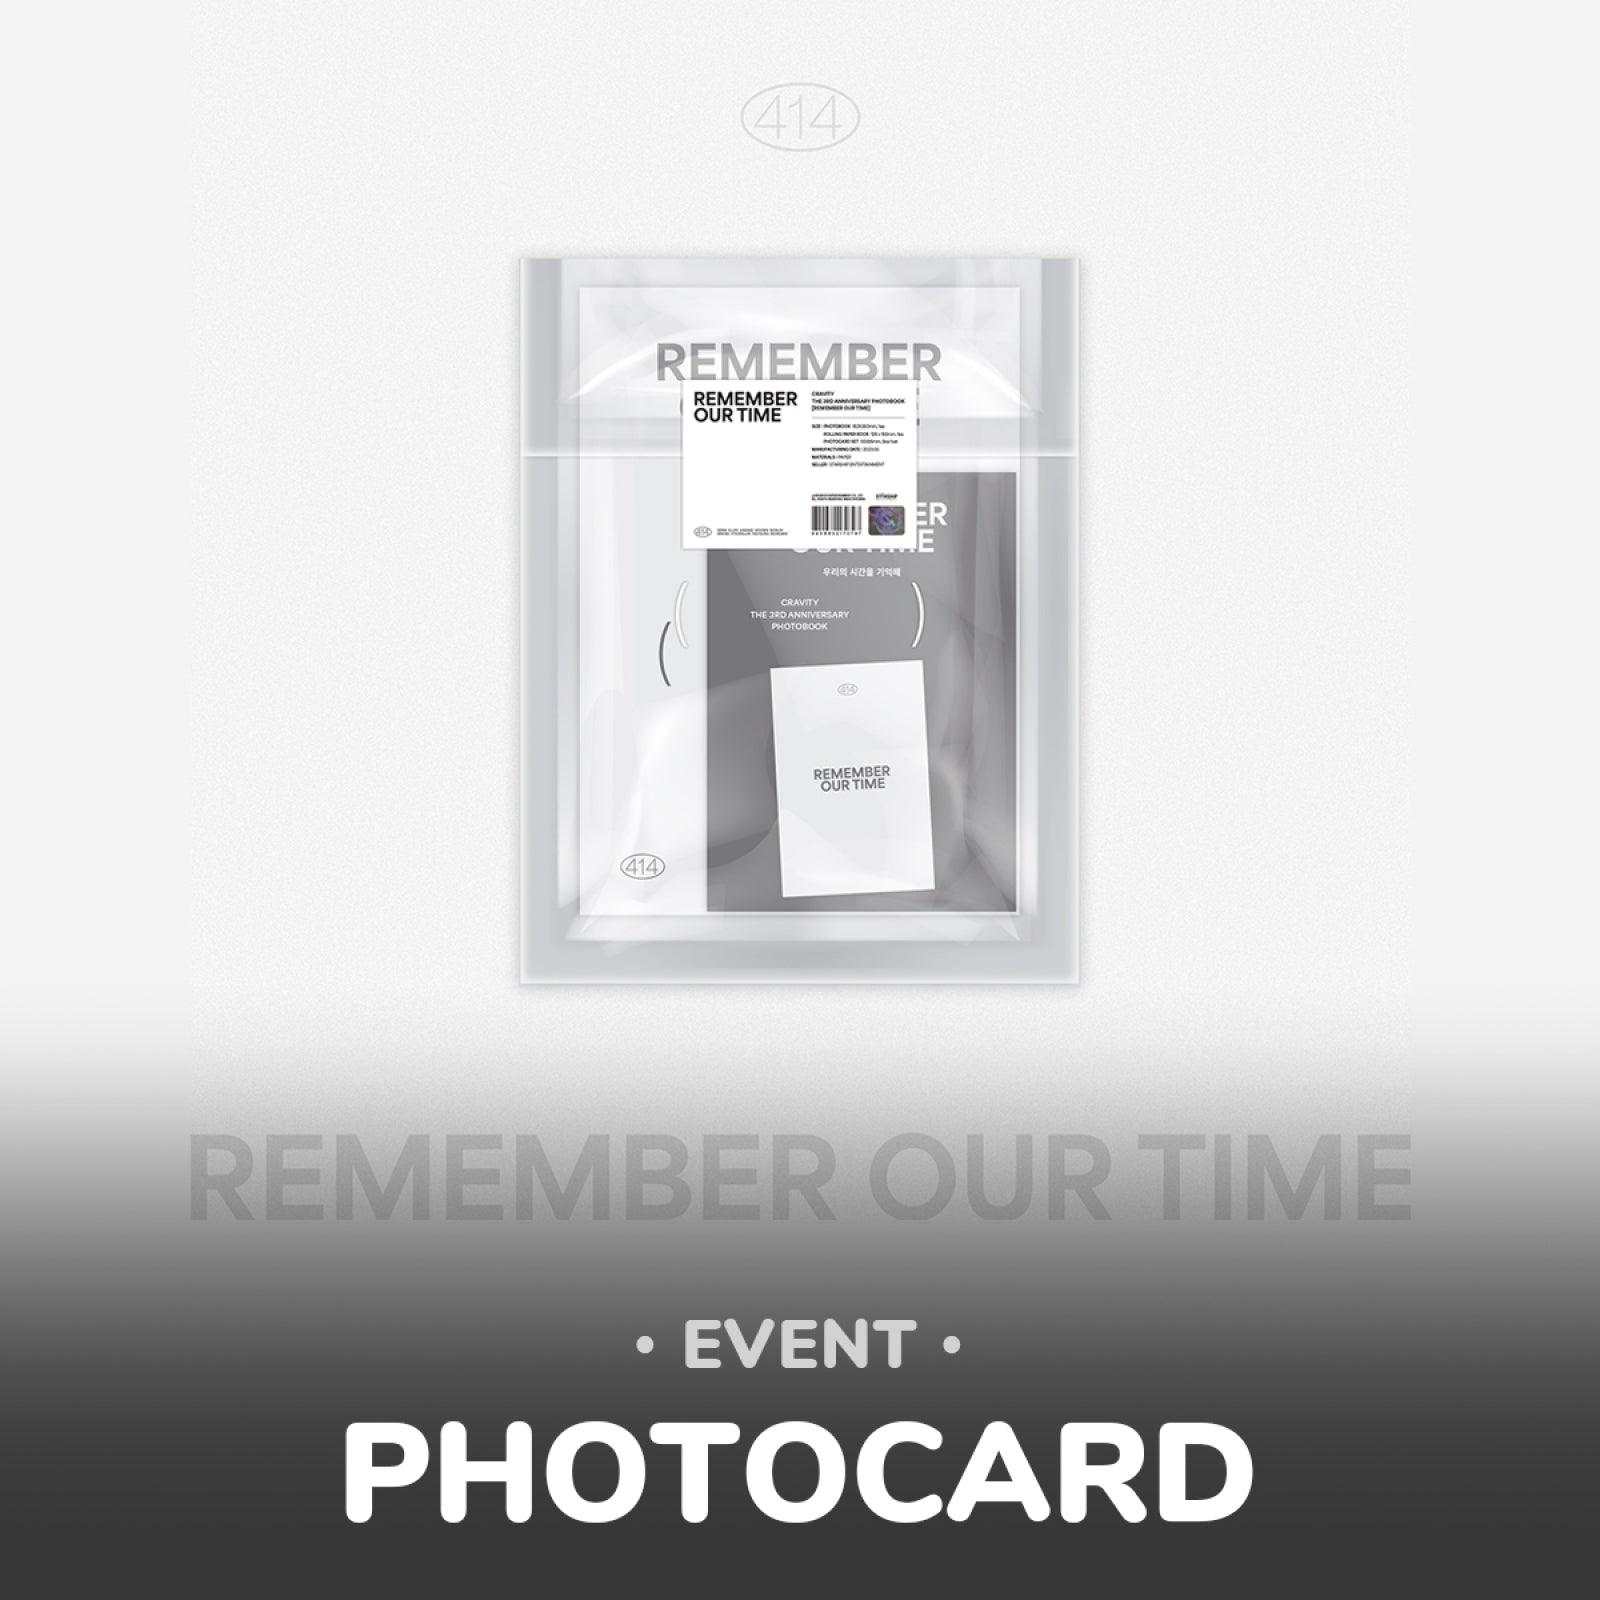 [PRE-ORDER] CRAVITY - THE 3RD ANNIVERSARY PHOTOBOOK [REMEMBER OUR TIME] - Shopping Around the World with Goodsnjoy